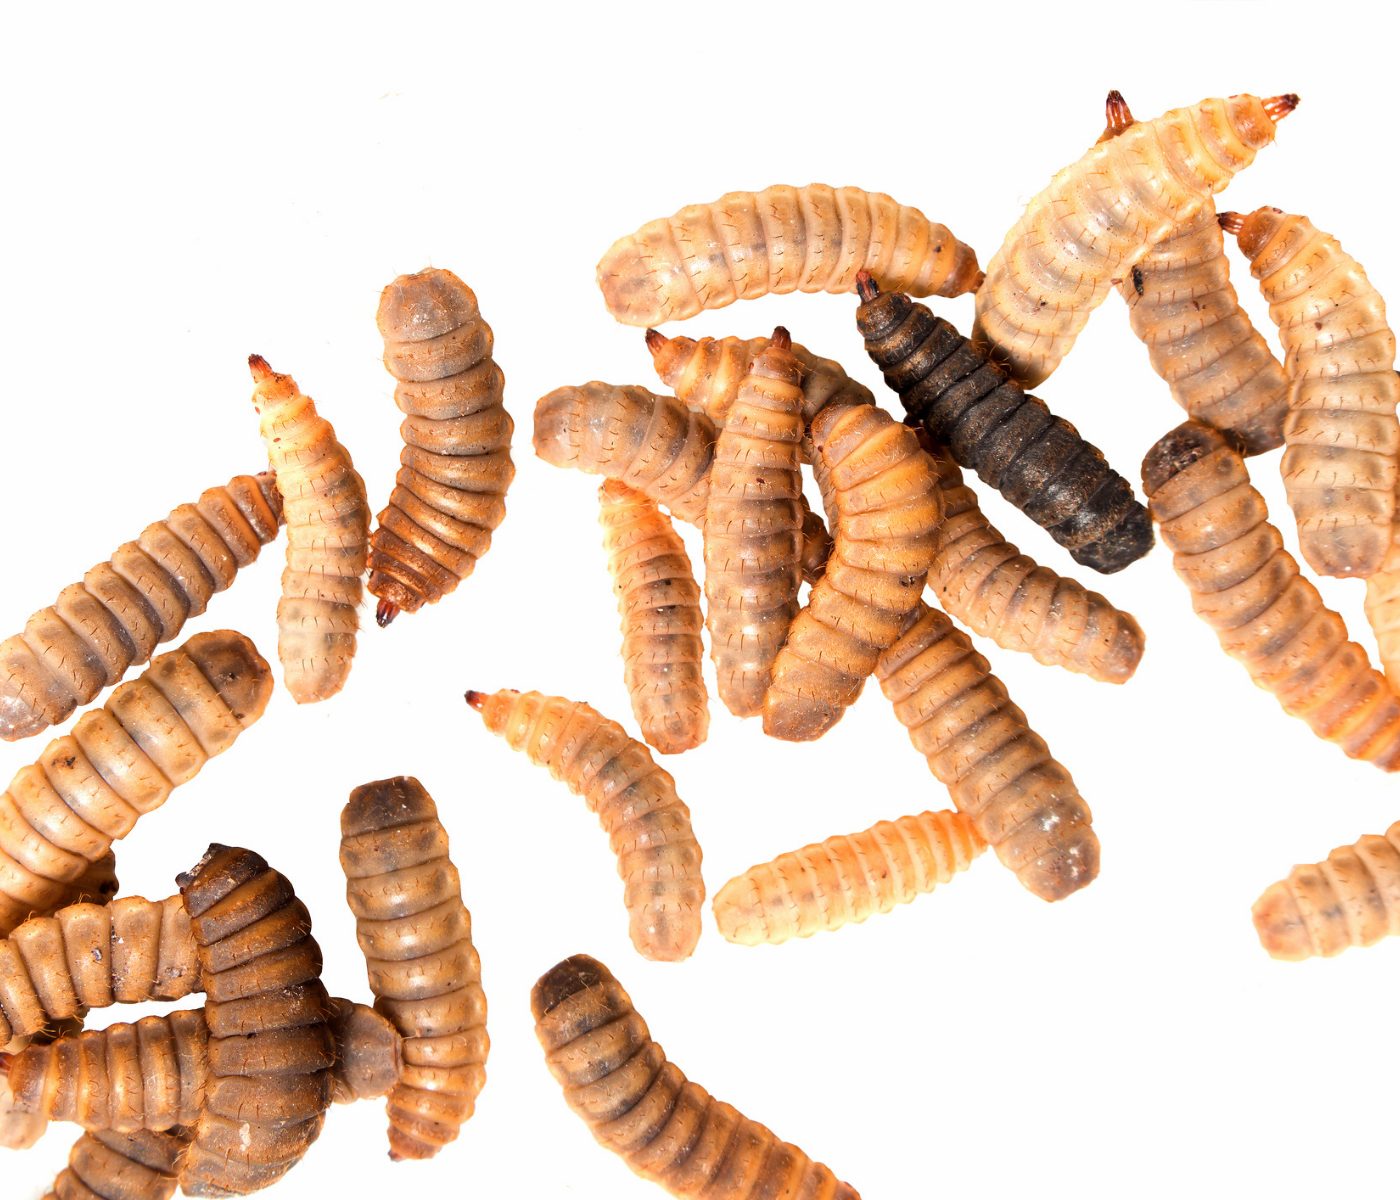 Insects in animal nutrition: regulations and markets overview